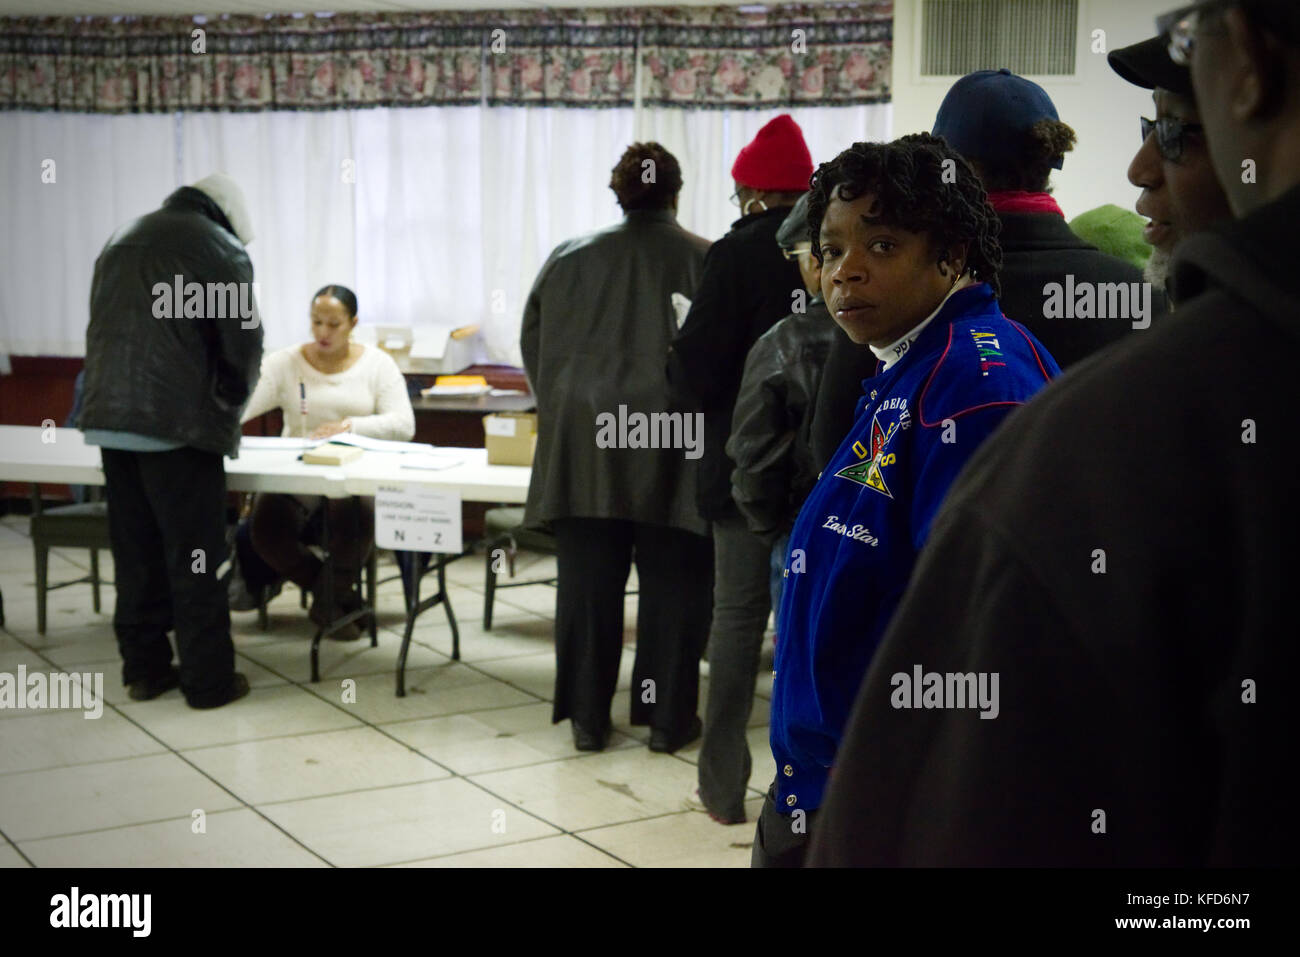 Voters wait in line to cast the ballot at a poling station in Philadelphia, PA, on Election Day. Stock Photo